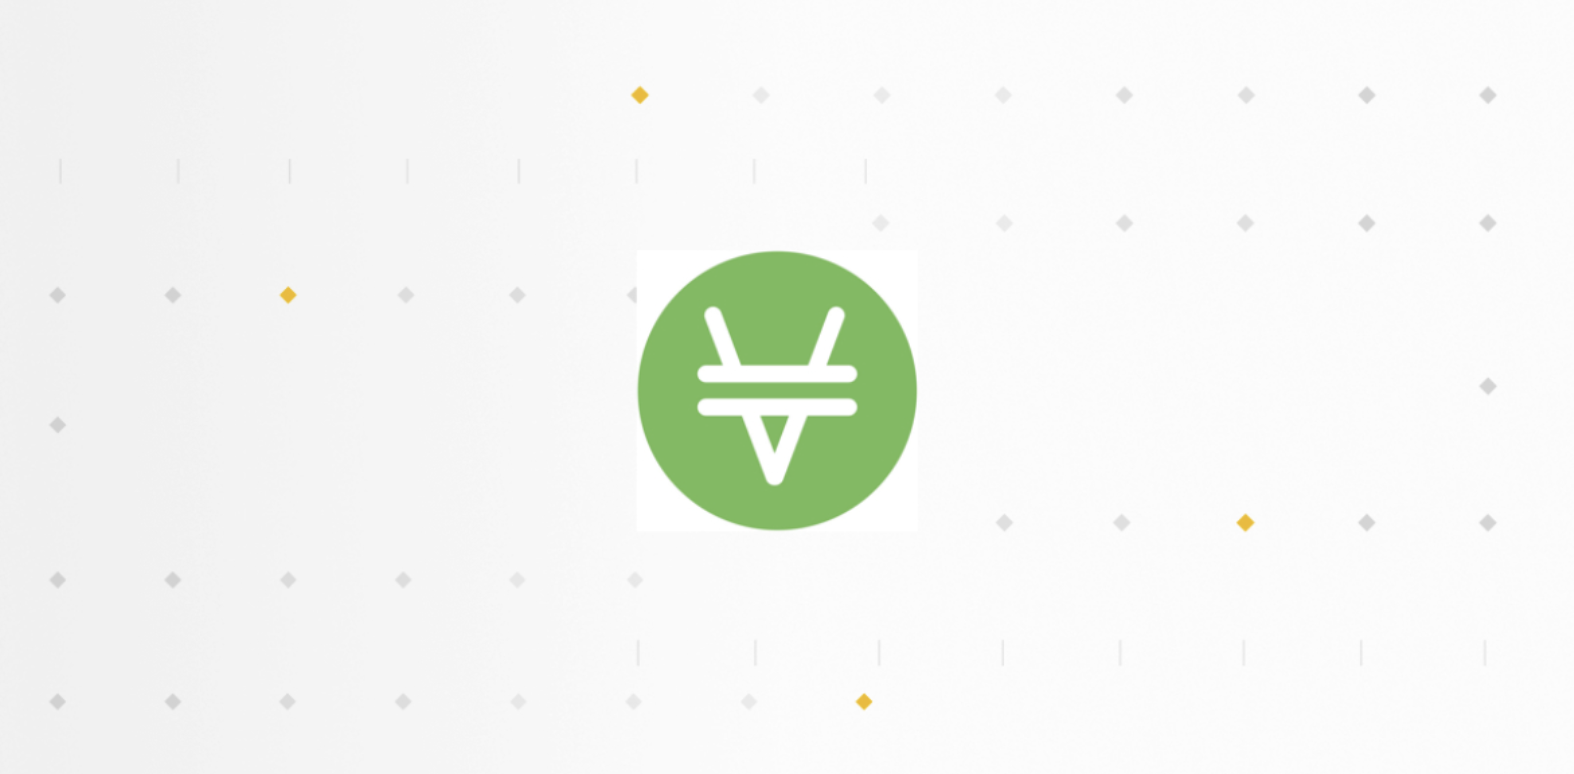 How to Buy Vai Coin?